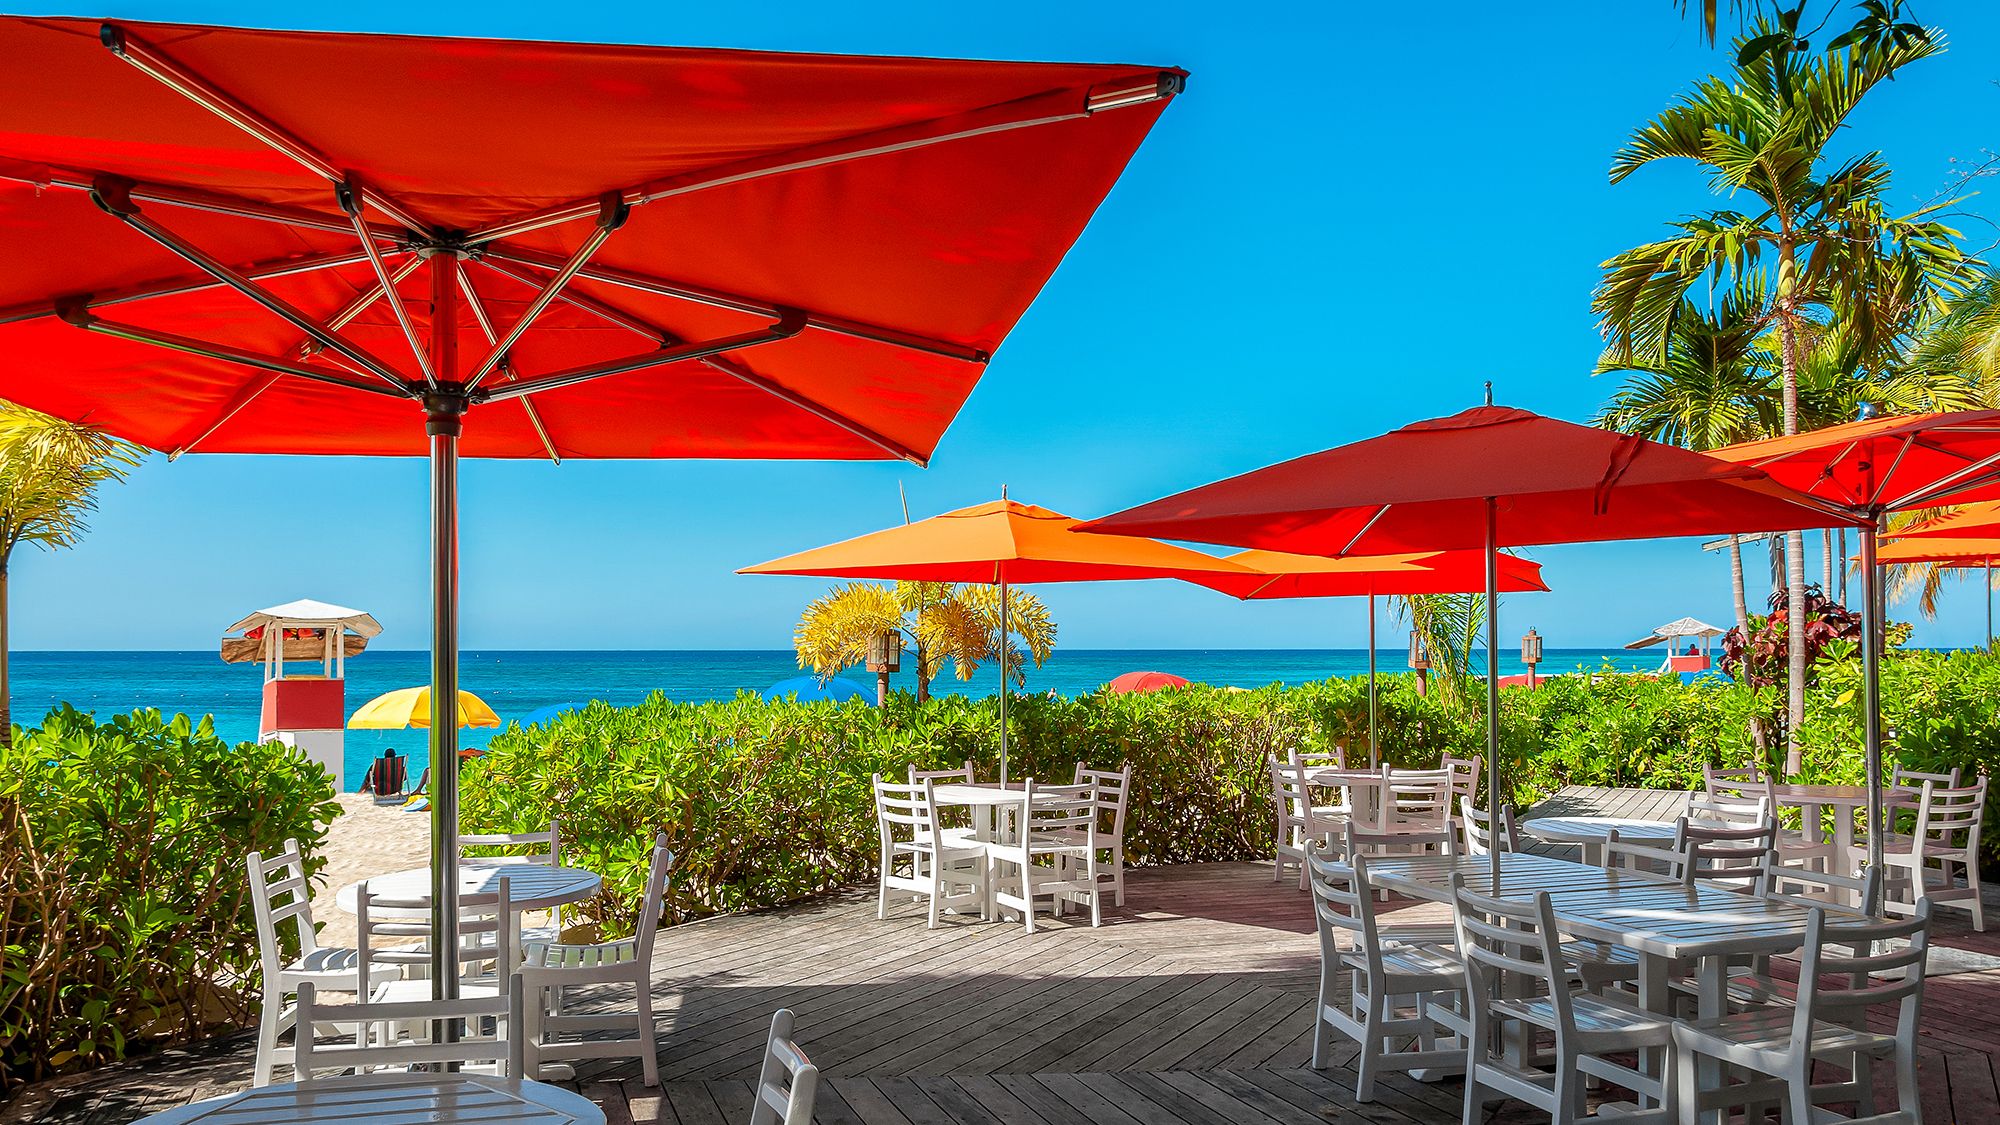 Something For Everyone At These Amazing Restaurants In Montego Bay